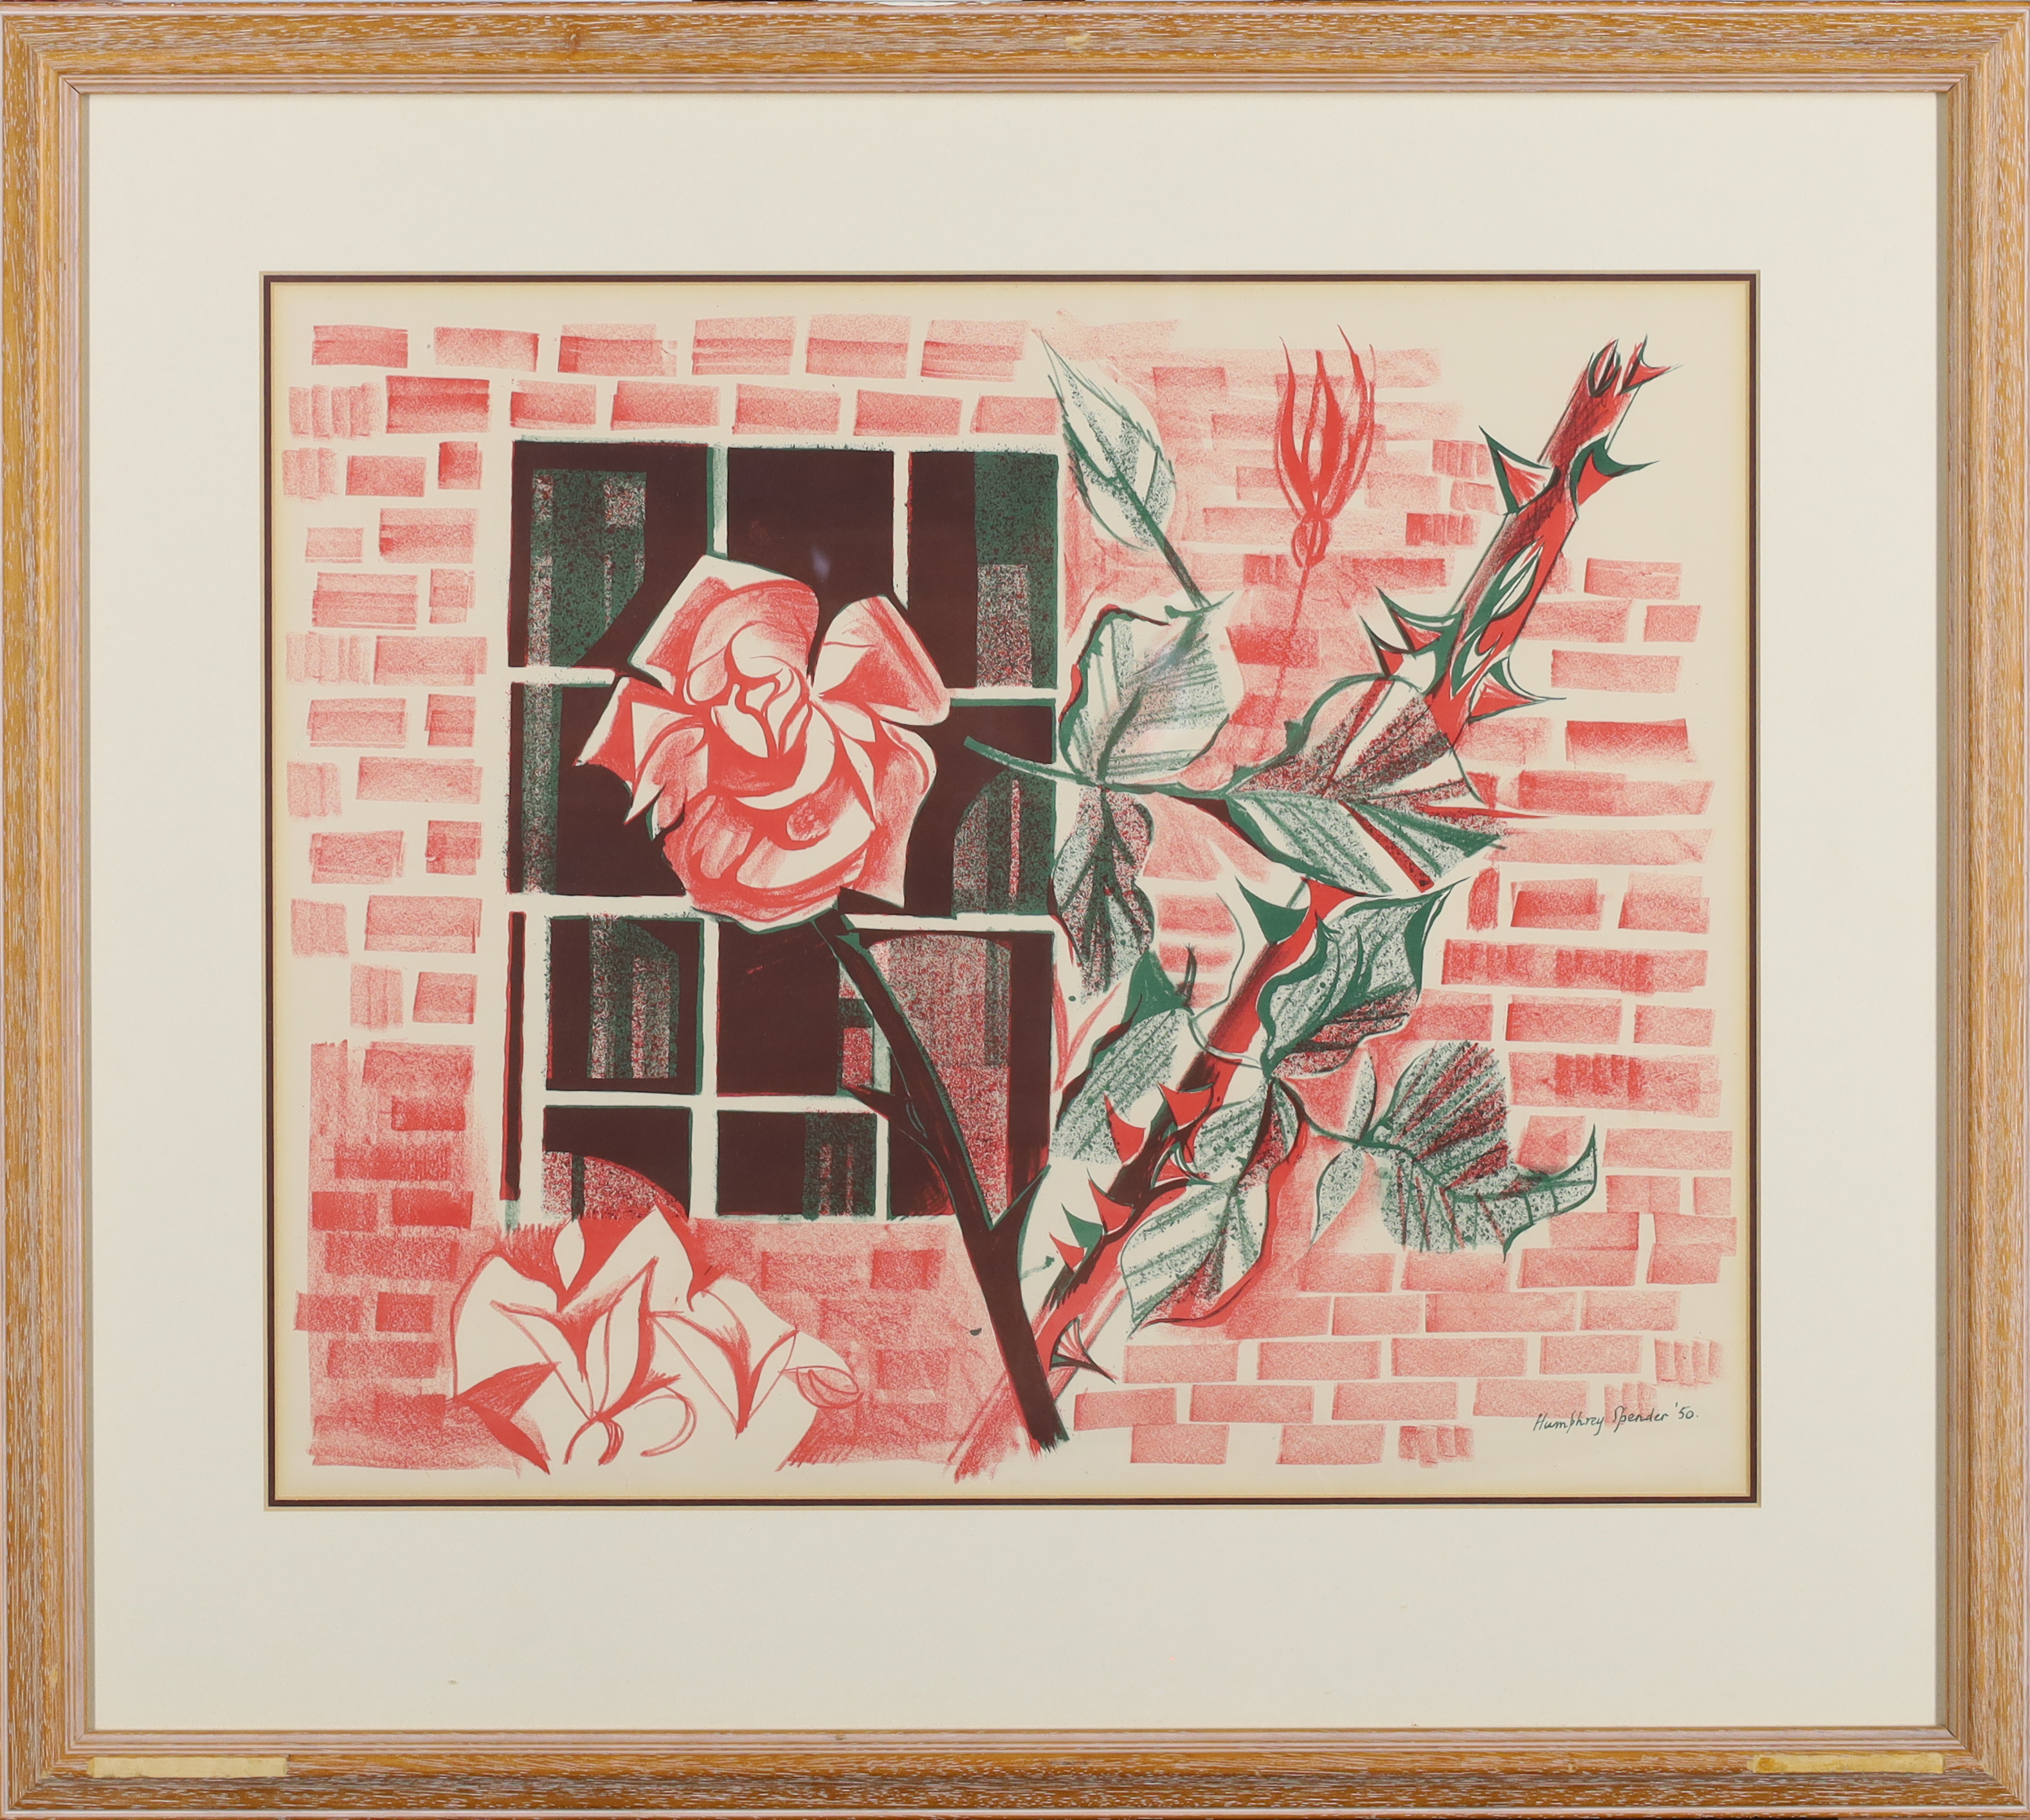 Humphrey Spender,  British 1910-2005 -  Rose at the window, 1950;  lithograph on paper, signed ... - Image 2 of 3